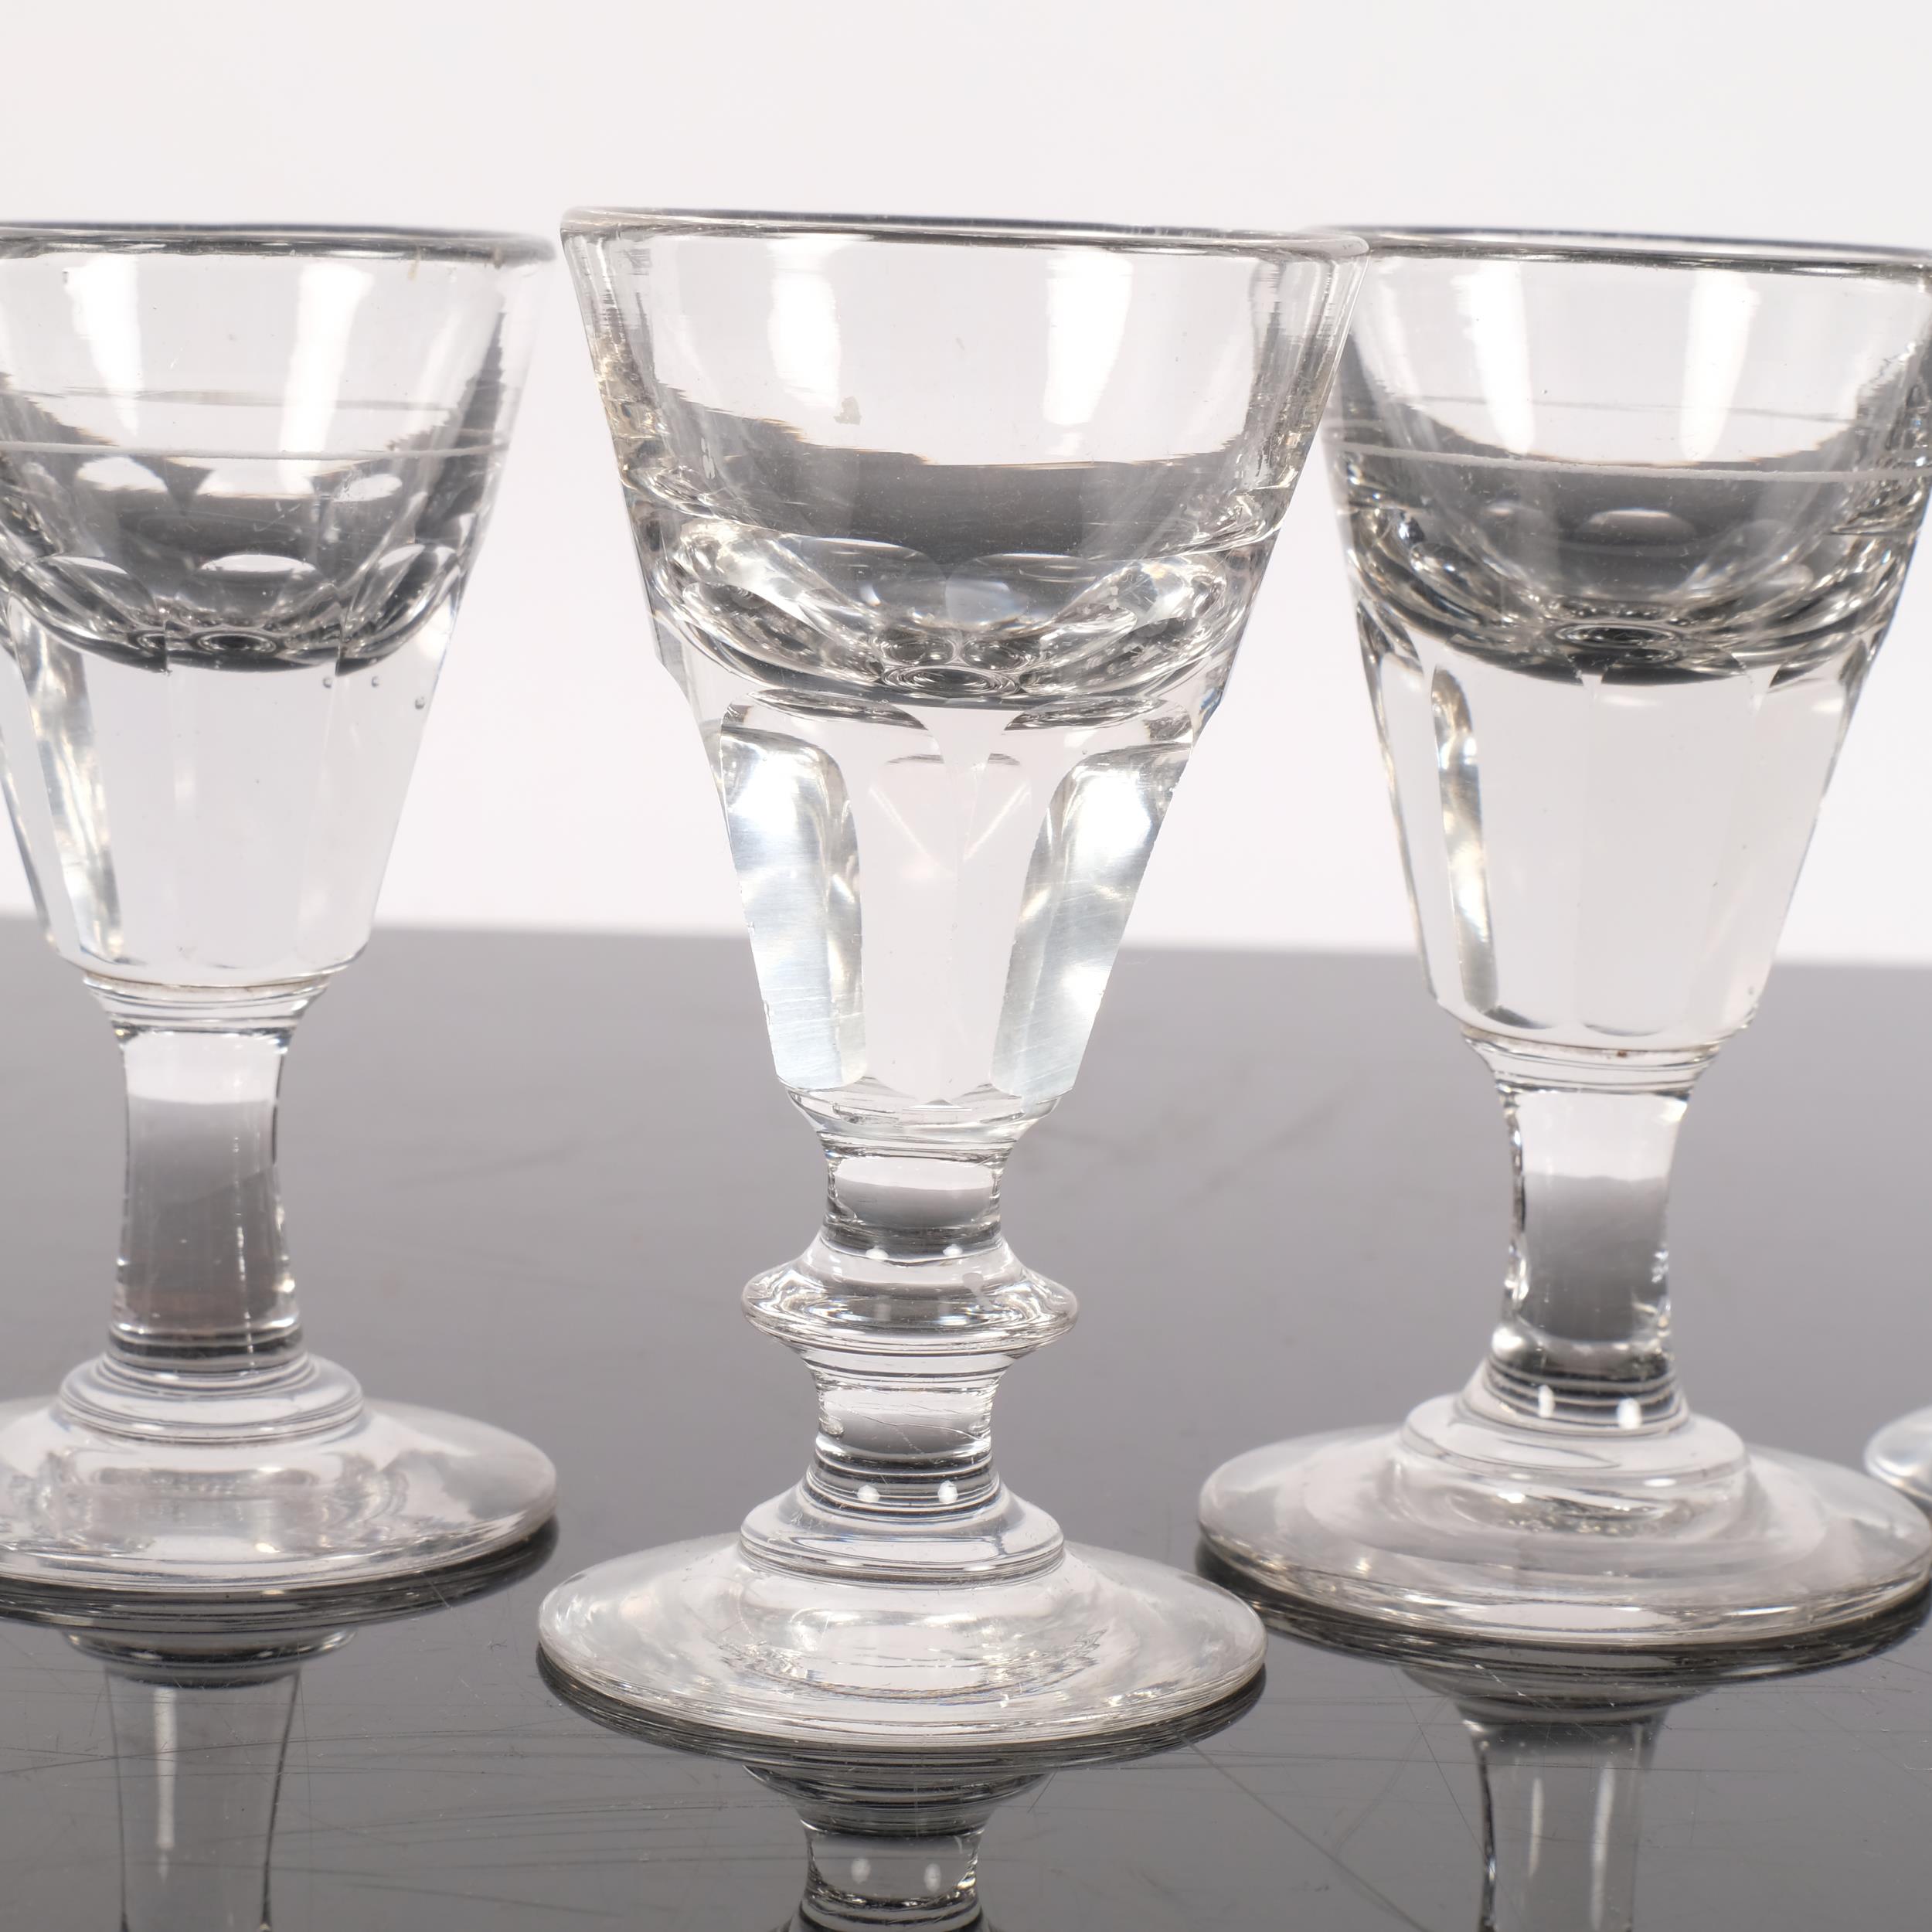 6 cut-glass toasting glasses, tallest 10cm - Image 2 of 2